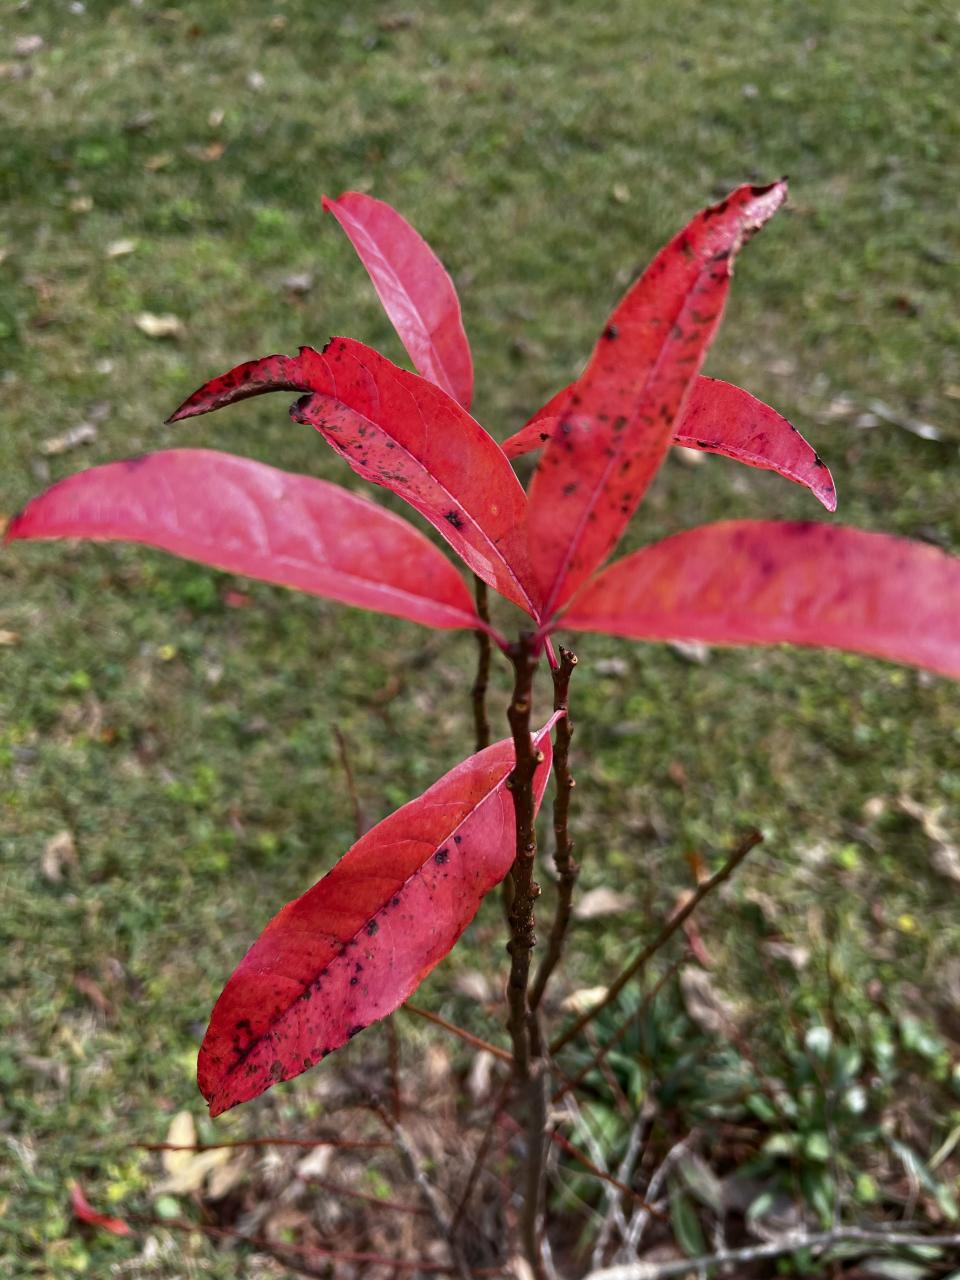 Sourwood is a medium-sized beauty that stands out in fall with red leaves, attracts pollinators with white blooms in mid-summer, and produces sought-after honey with a deep, spicy flavor.